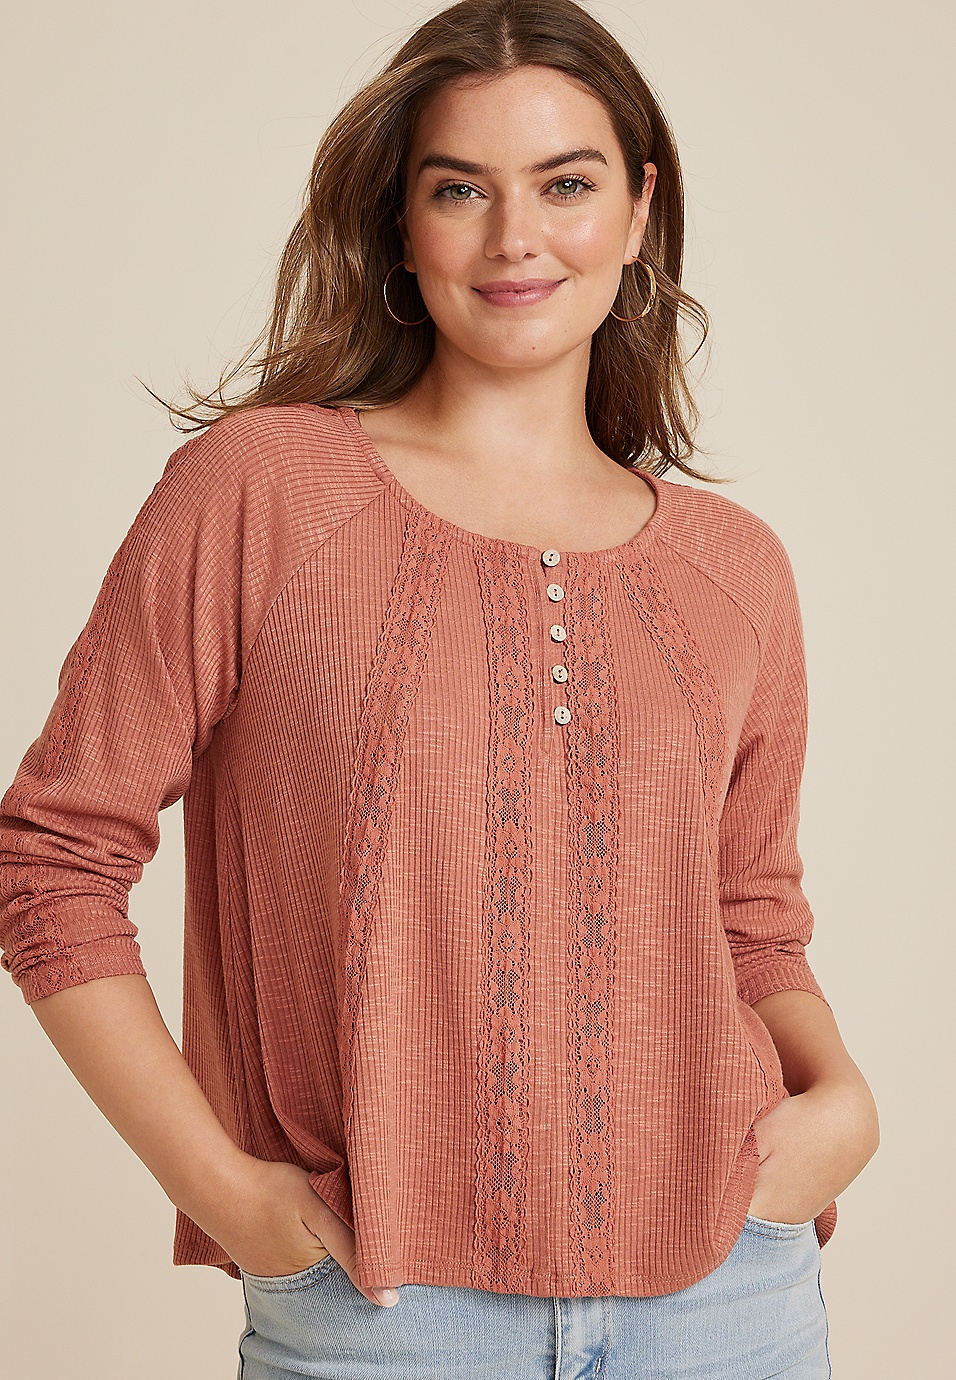 Beautiful Long Sleeve Lace accents on sleeves and back Henley Top